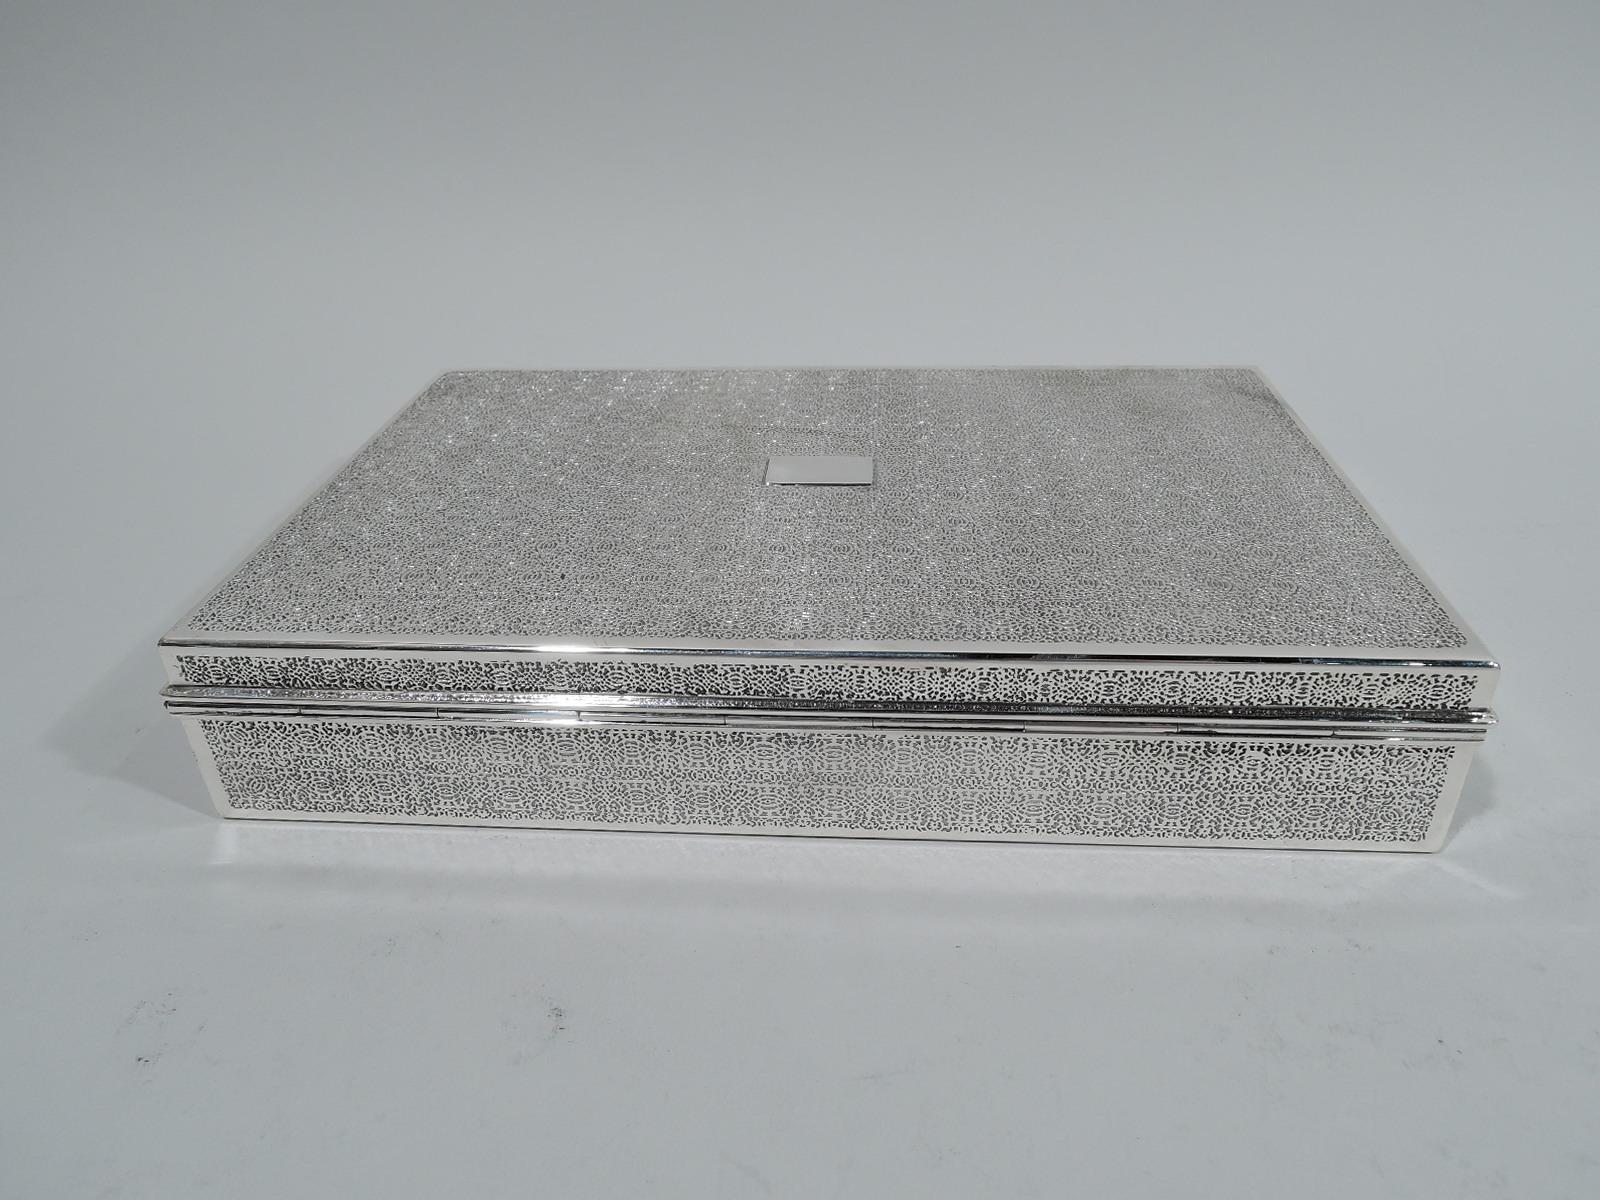 Modern sterling silver desk box. Made by Tiffany & Co. in New York, circa 1936. Rectangular with straight sides. Cover flat and hinged with molded rim. The classic form embellished with dense and interlacing acid-etched repeating pattern on cover